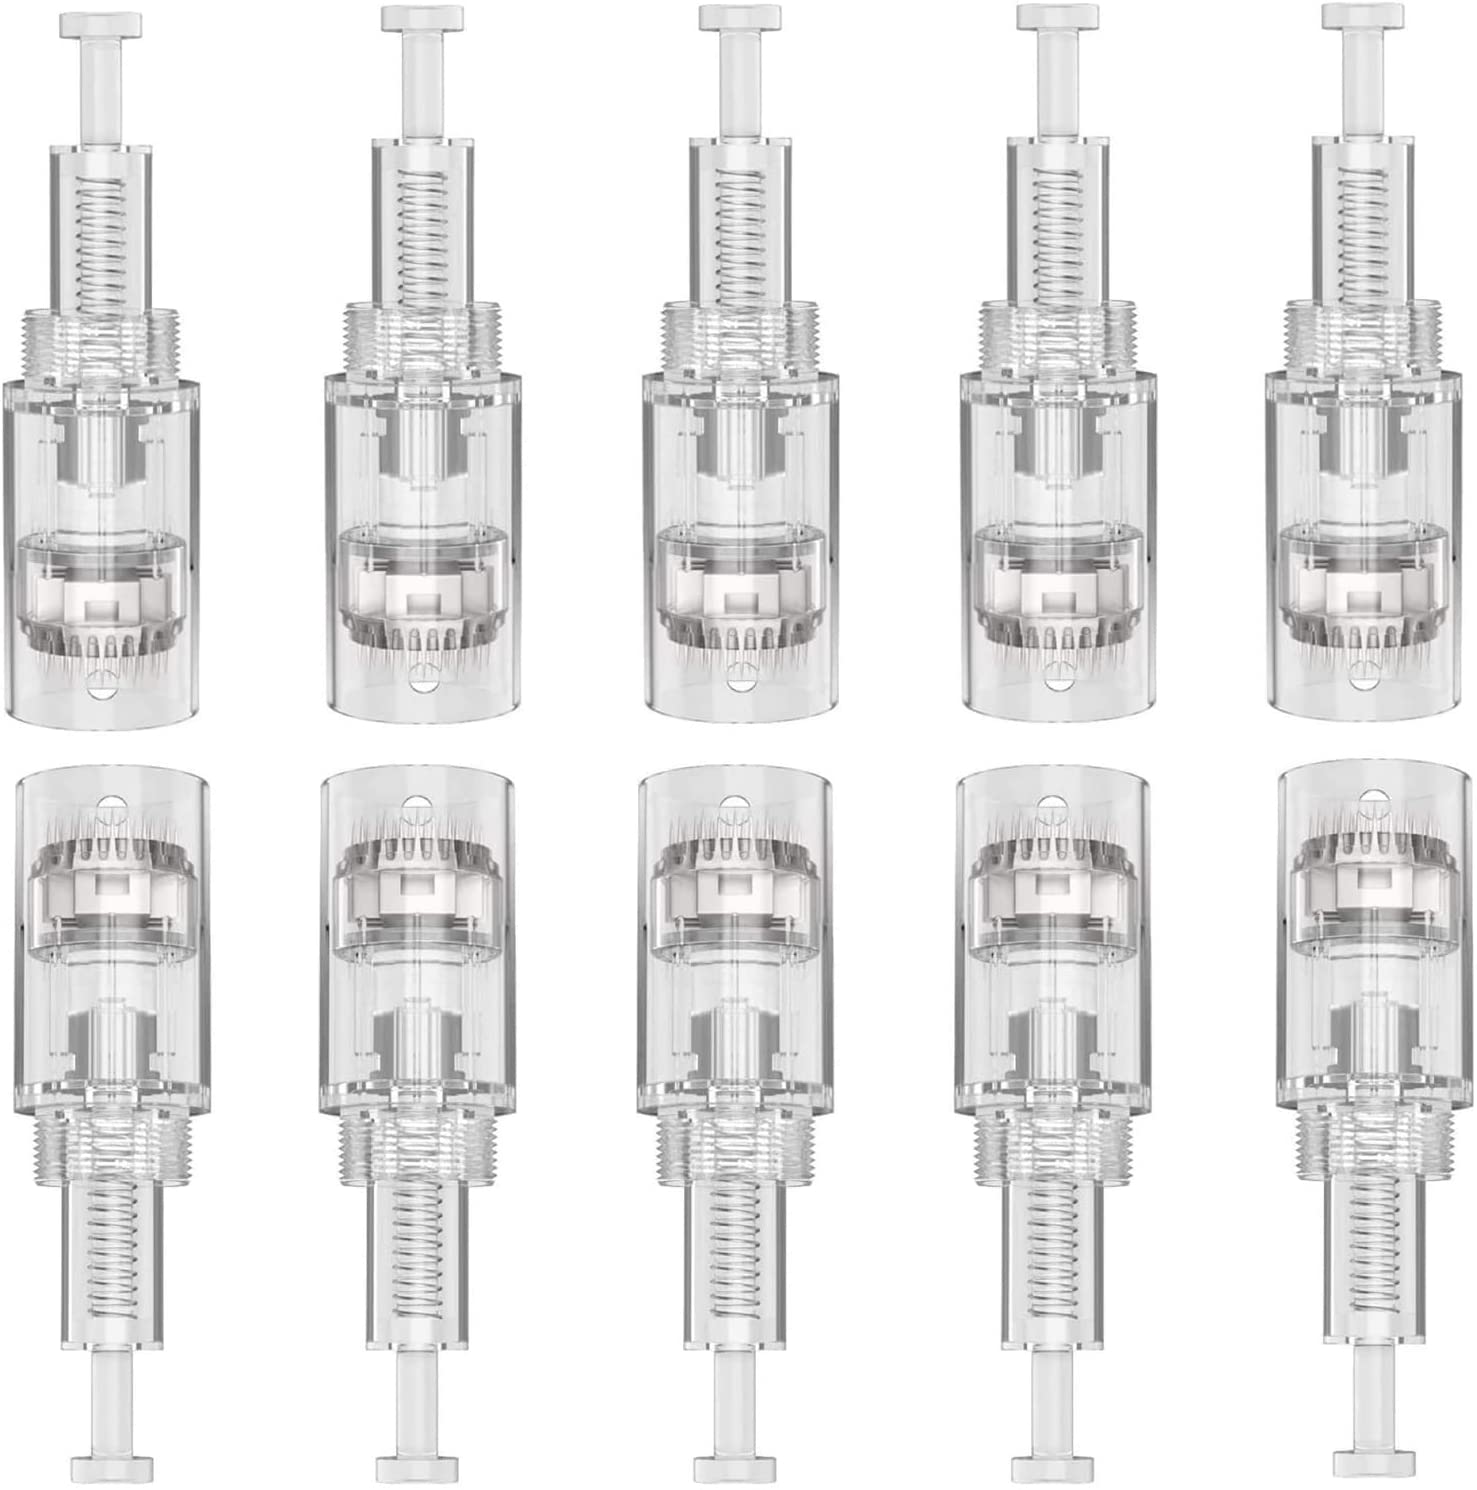 P-Beauty Cosmetic Accessories Dermapen 12 Needle Cartridges Replacement Needle Cartridges for Car Derma Electric Pen Microneedling Thread Closure Thread Slot Pack of 10 (12 Pins)